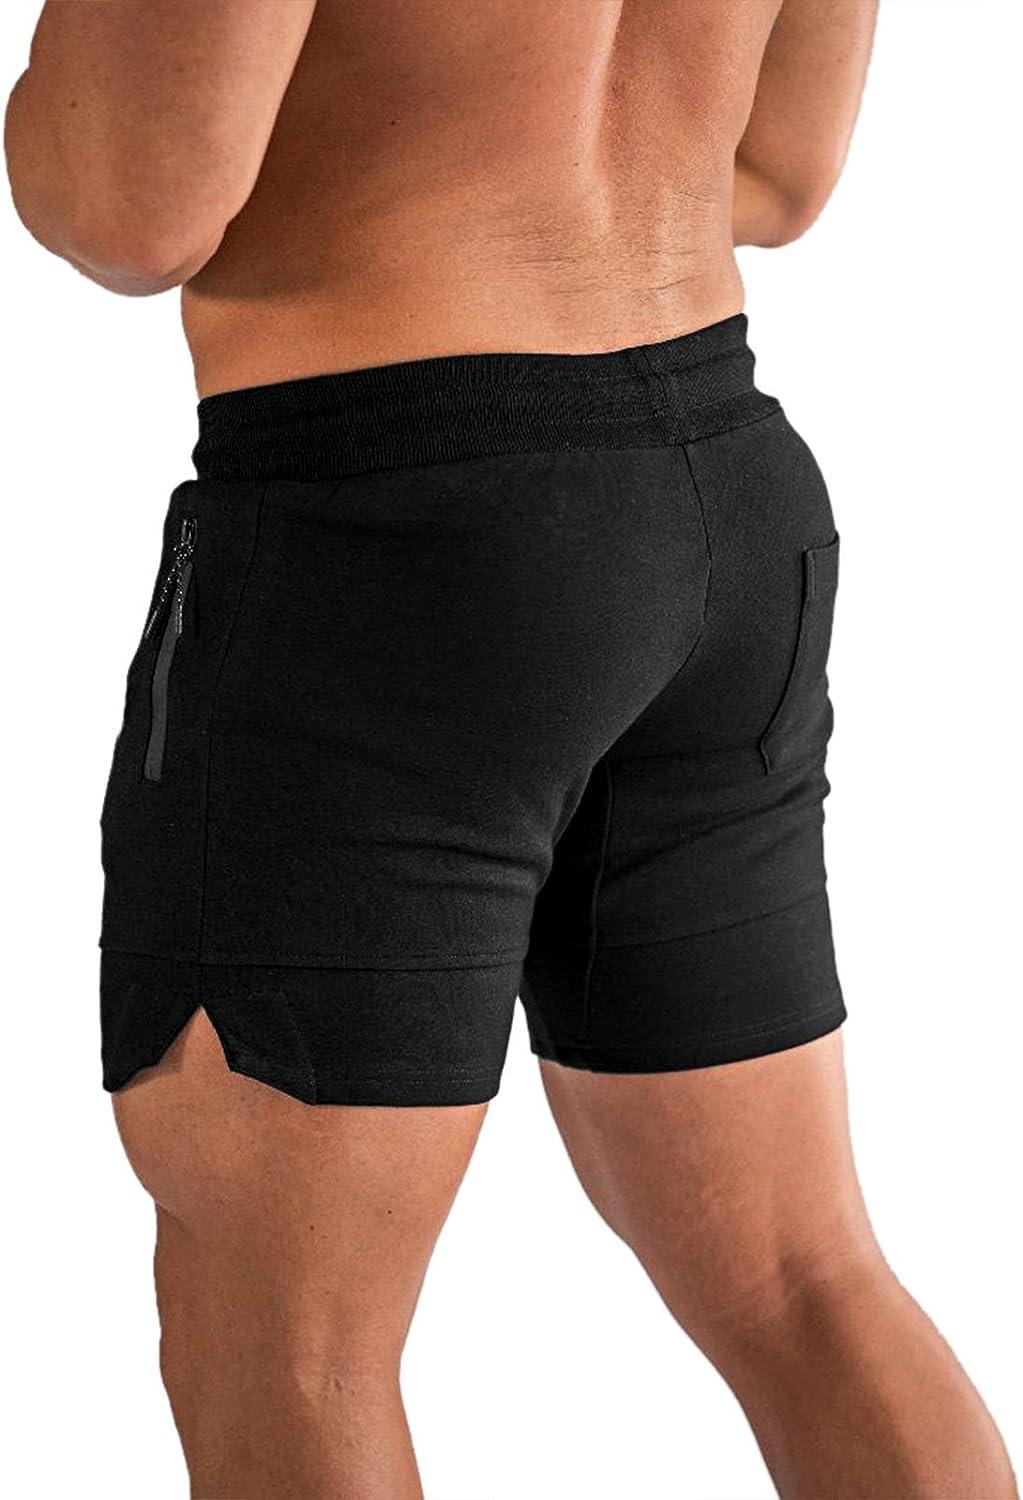 PIDOGYM Men's 5 Gym Workout Shorts,Fitted Jogging Short Pants for